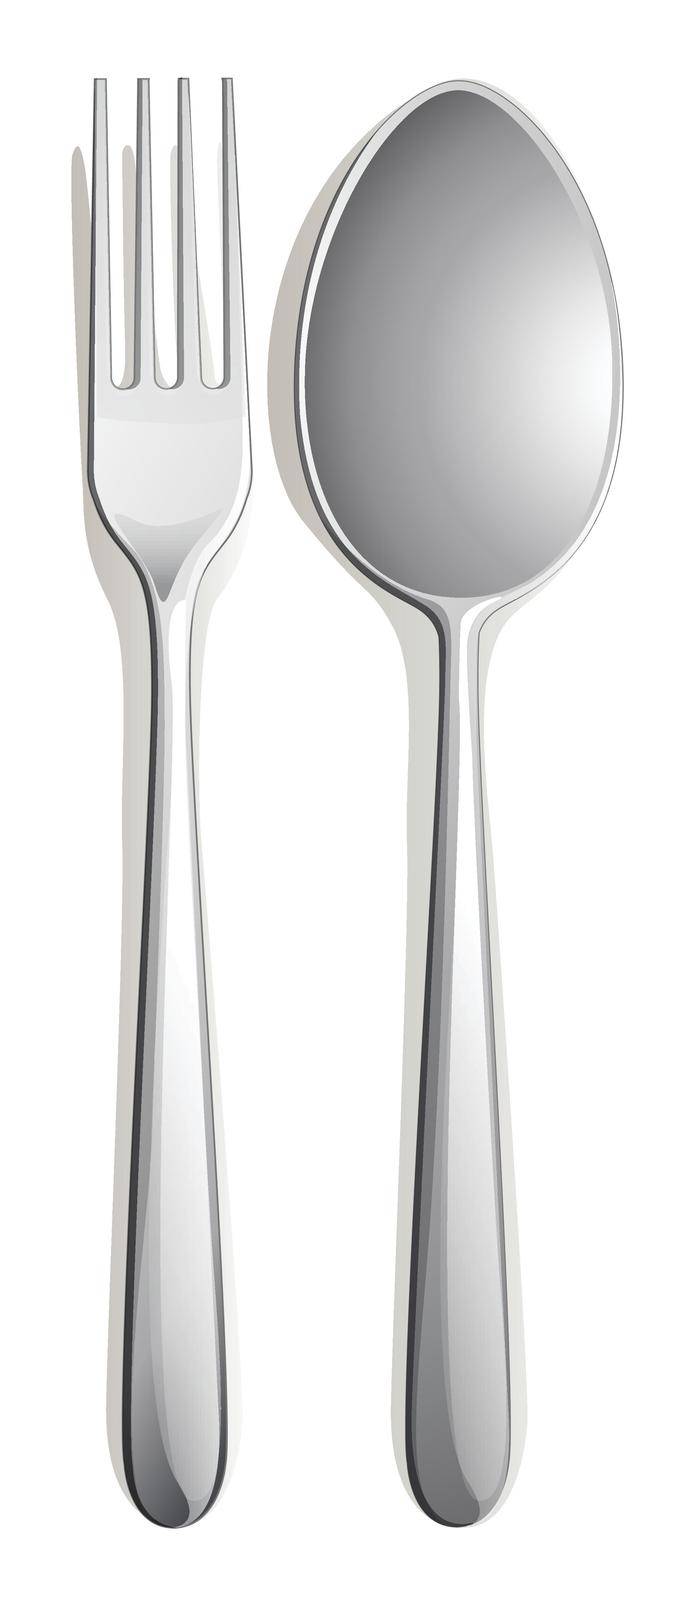 illustration of a spoon and a fork on white background